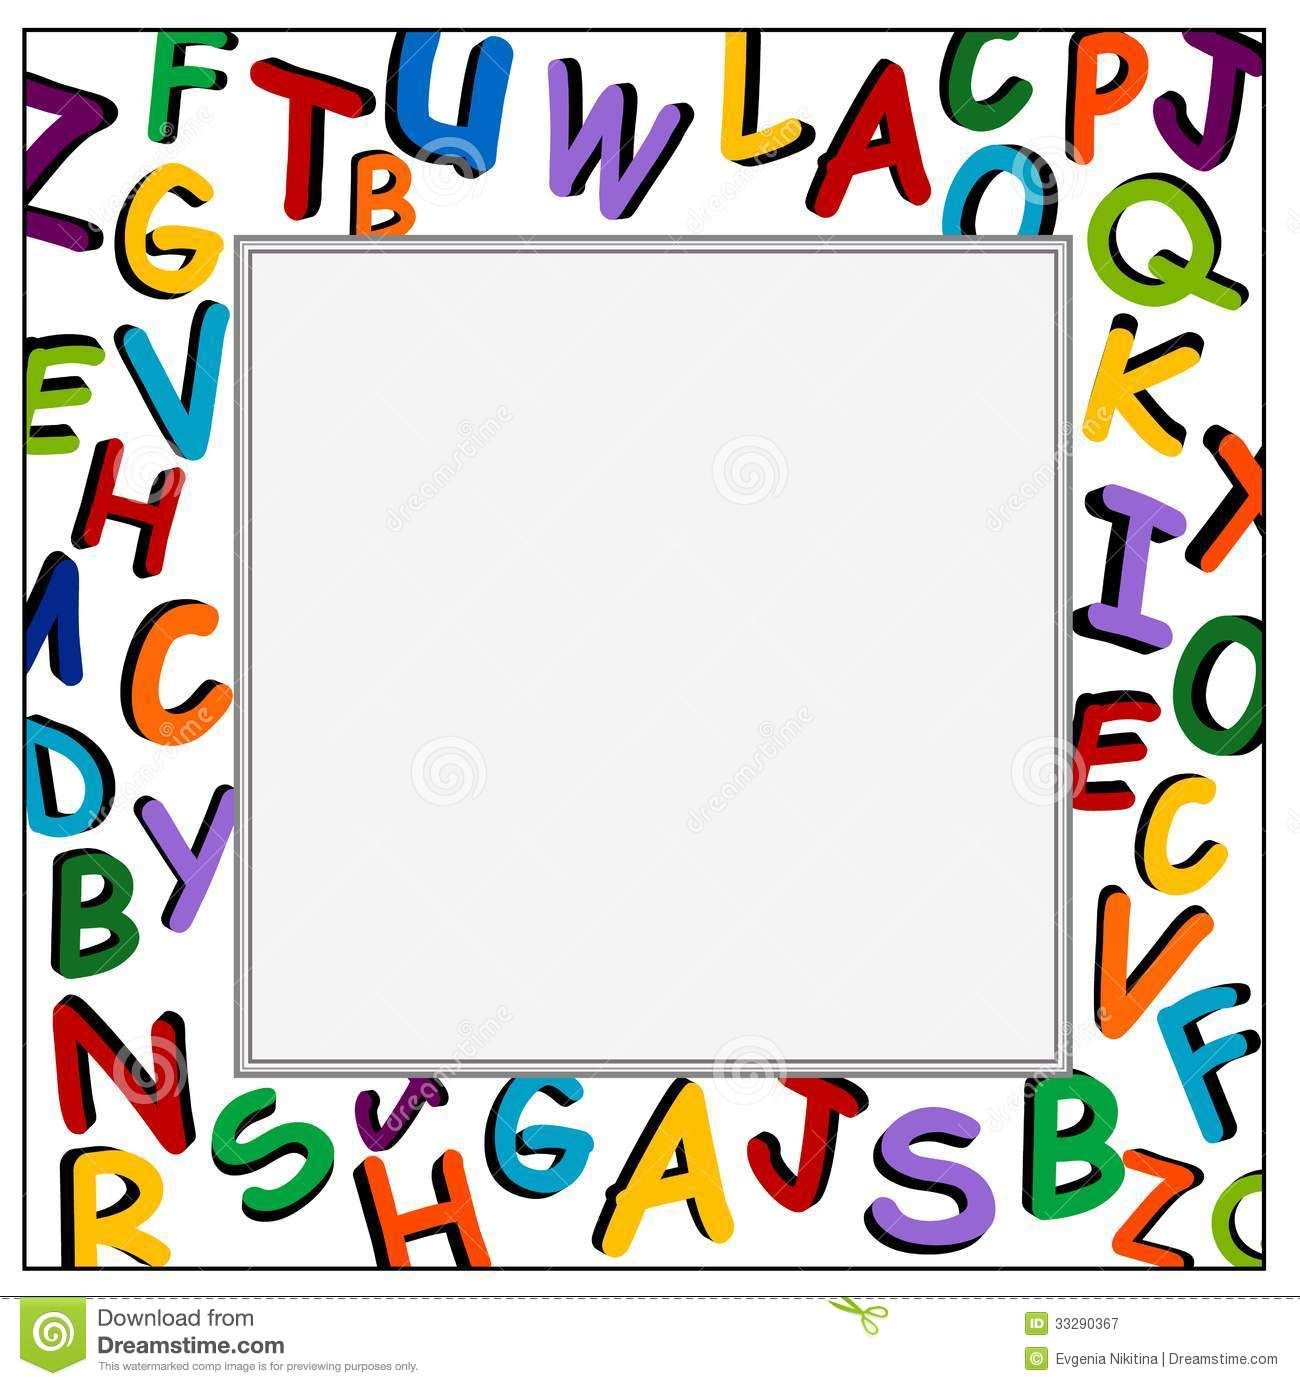 Free PPT and clipart frames for worksheets